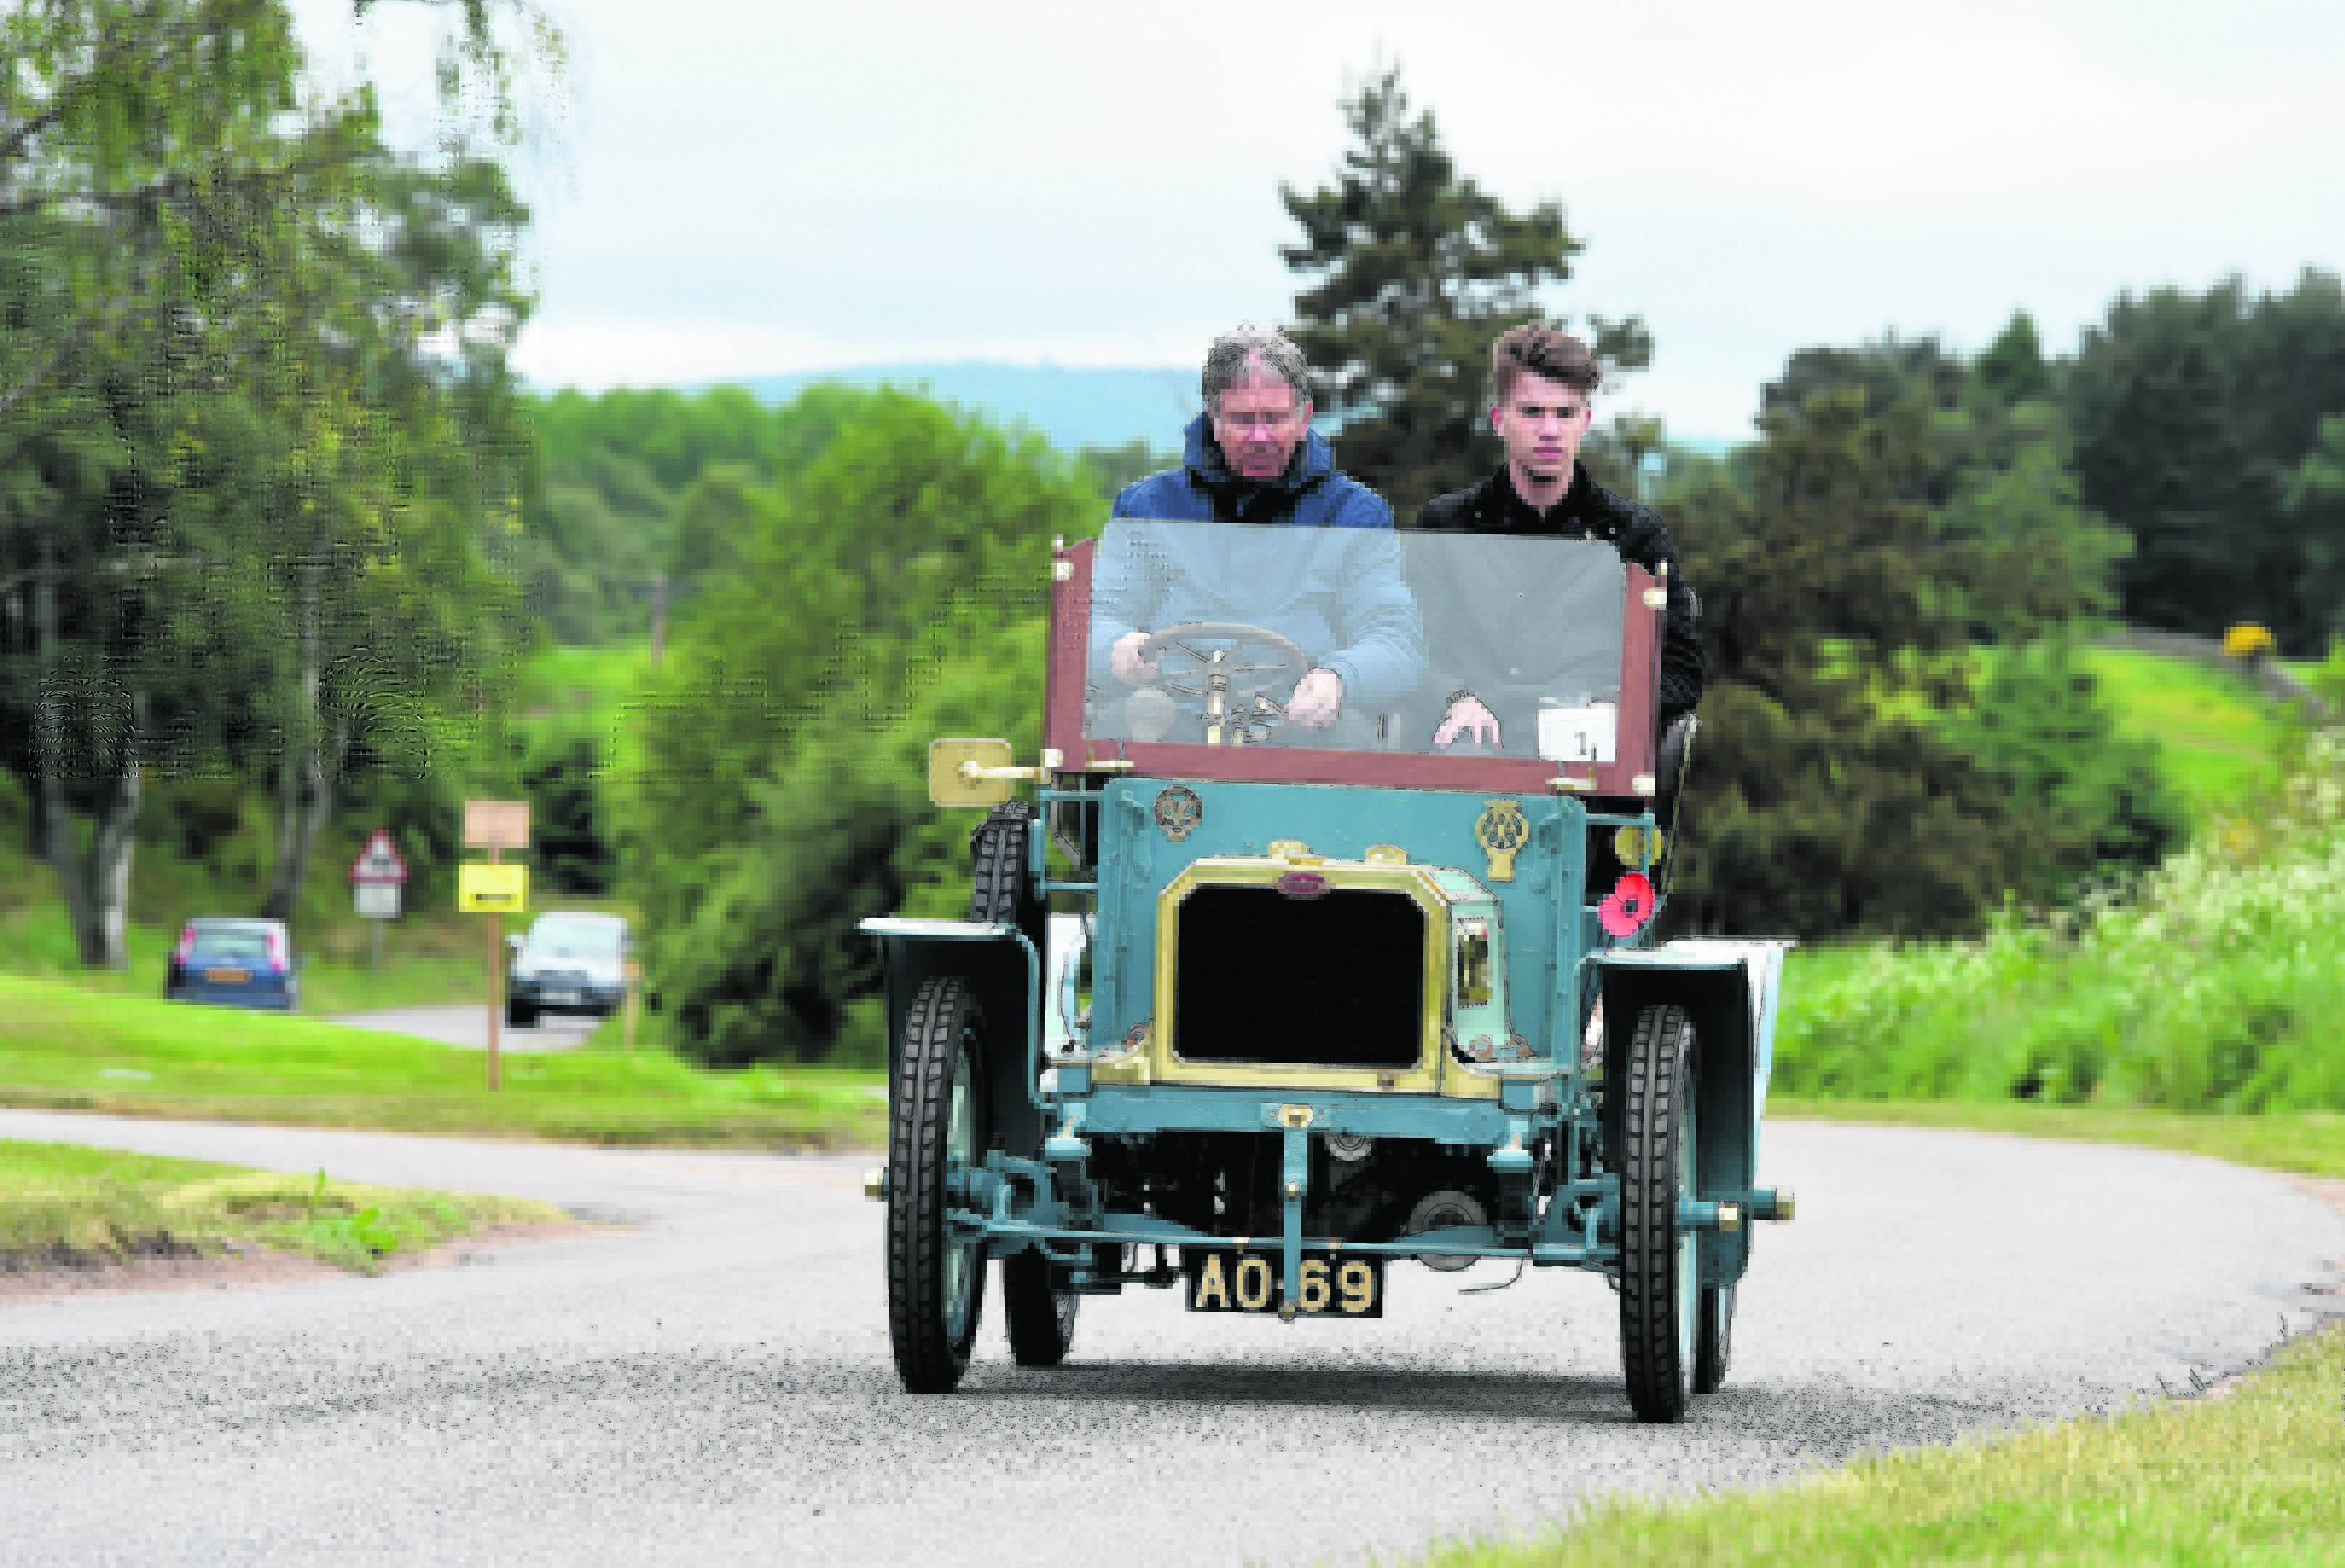 The Kildrummy rally at Deeside Activity Park, Aboyne. In the picture the cars go for a drive.
Pictures by Jim Irvine